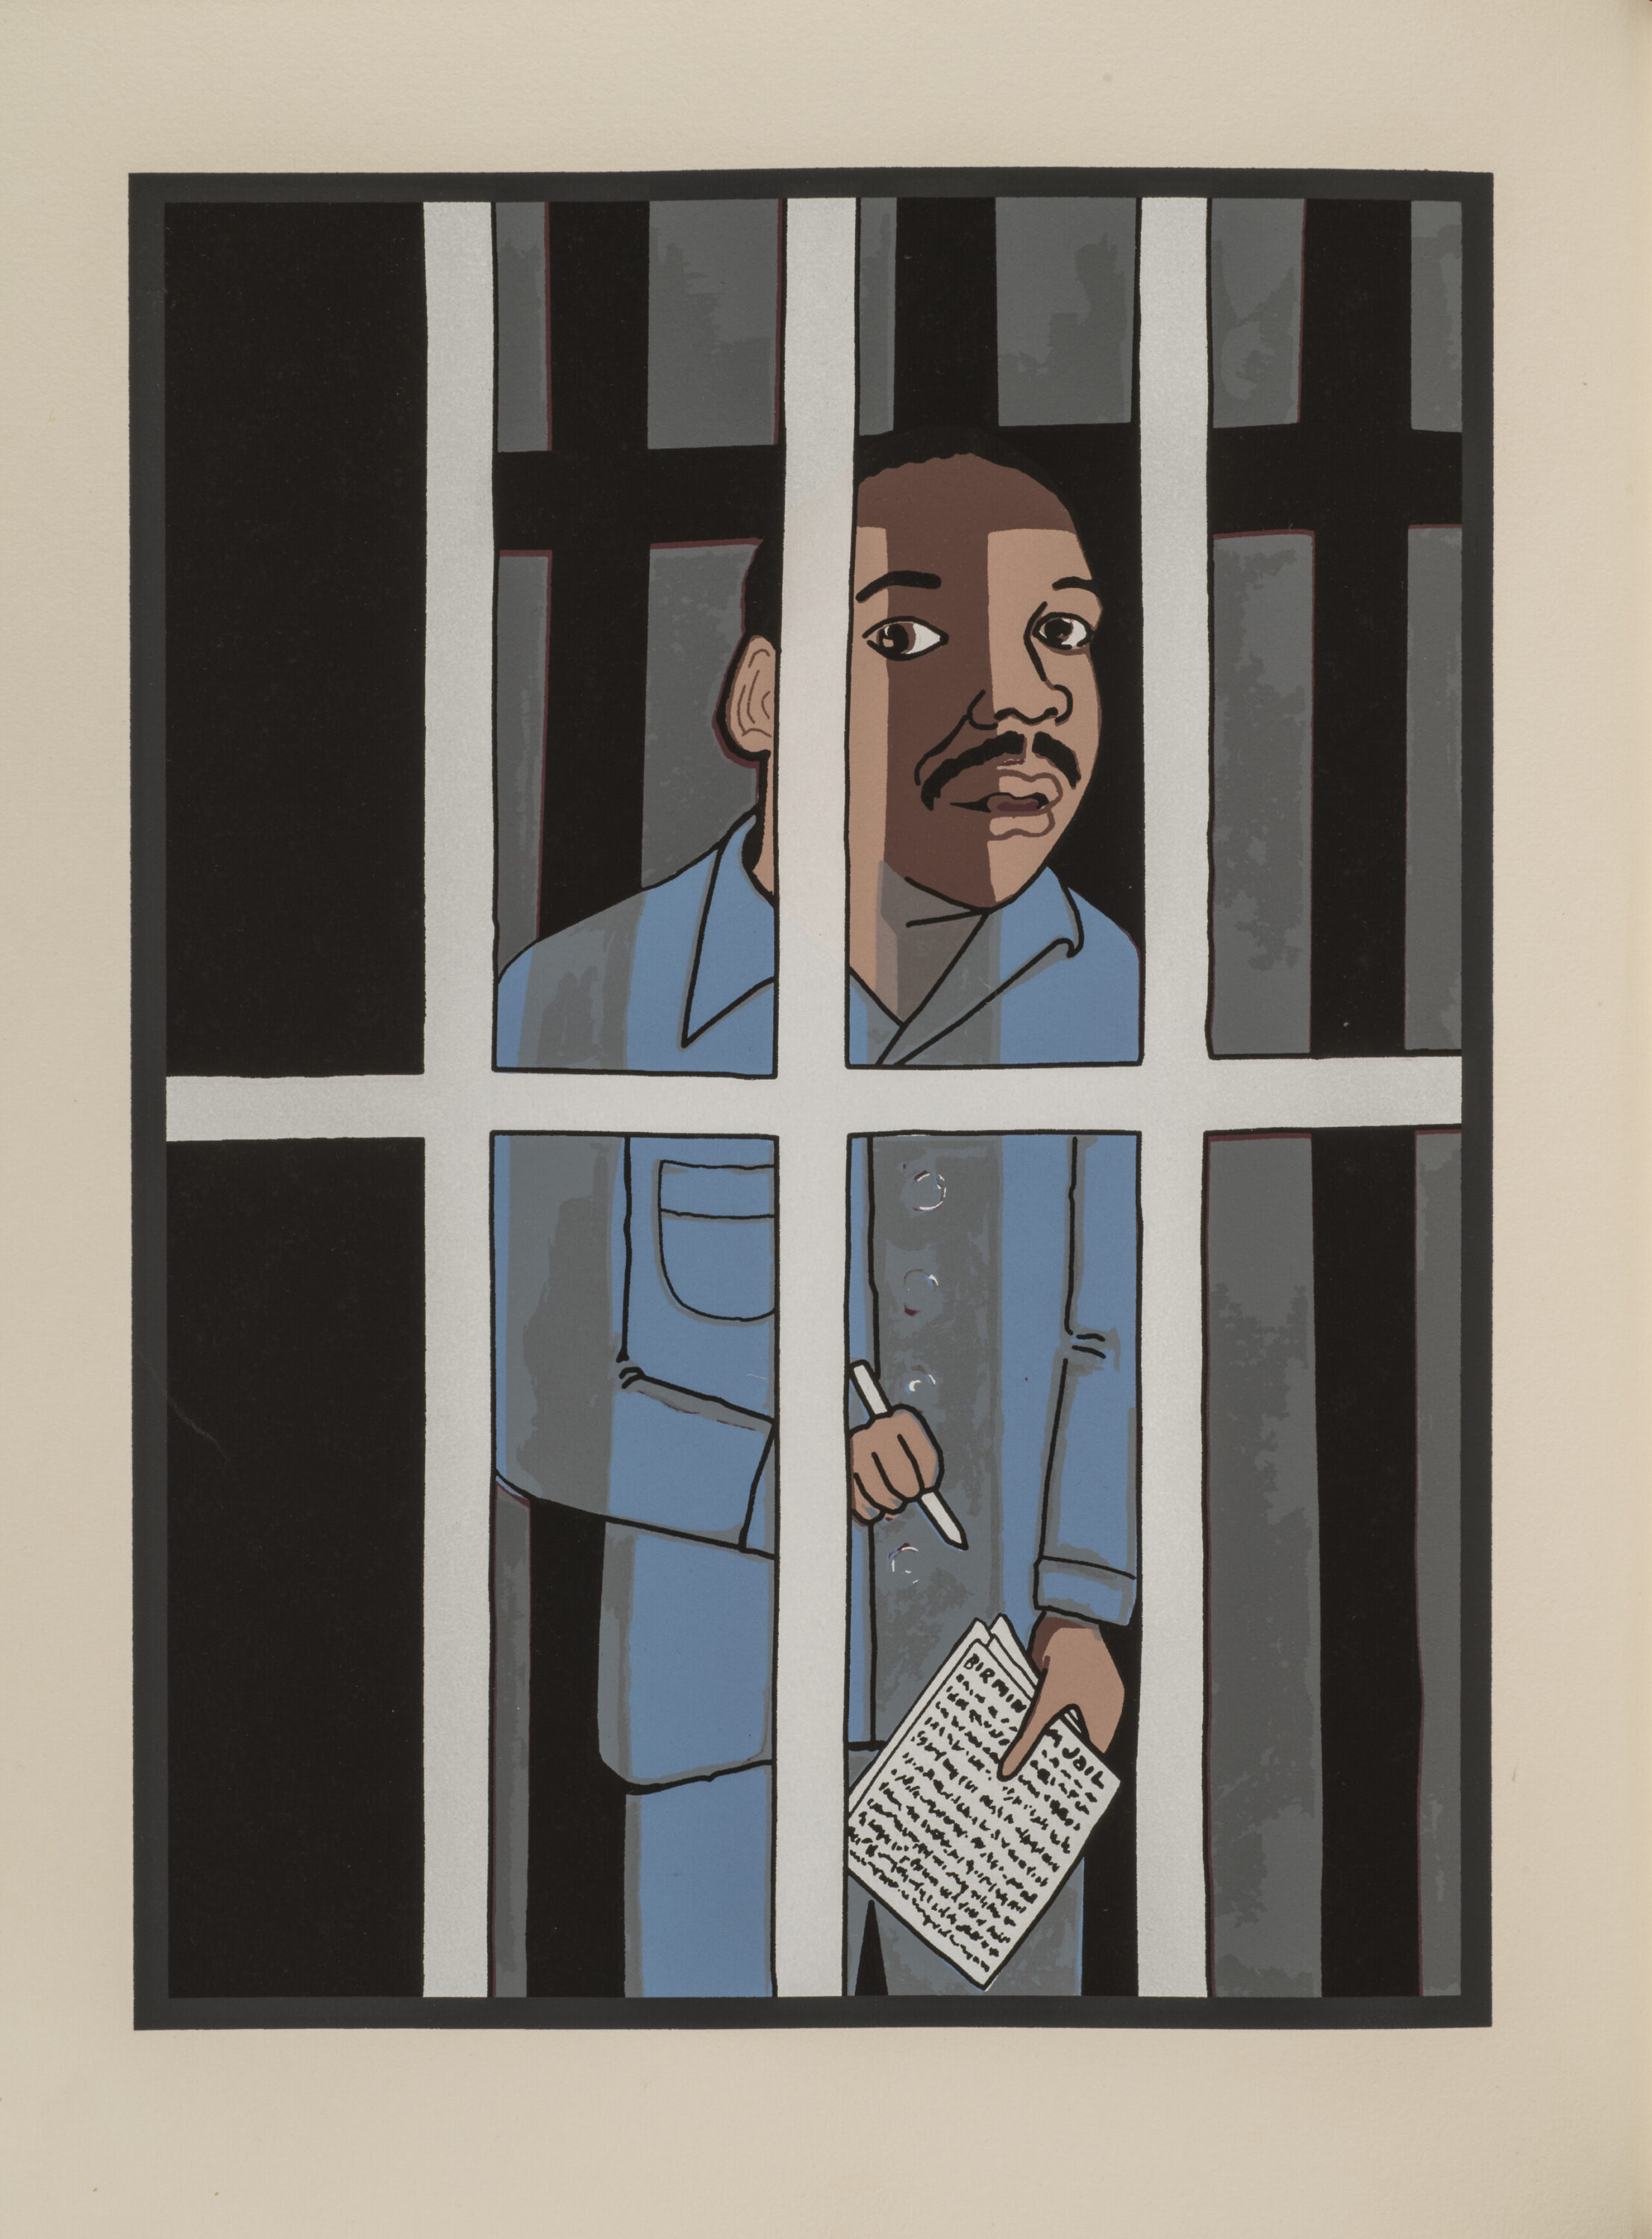 A print of Martin Luther King Jr., a medium-skinned man with short black hair and a black mustache, wearing a light blue jumpsuit standing behind the bars of a jail cell. He is holding a pen and paper in his hands and his mouth is slightly open as if he is speaking.